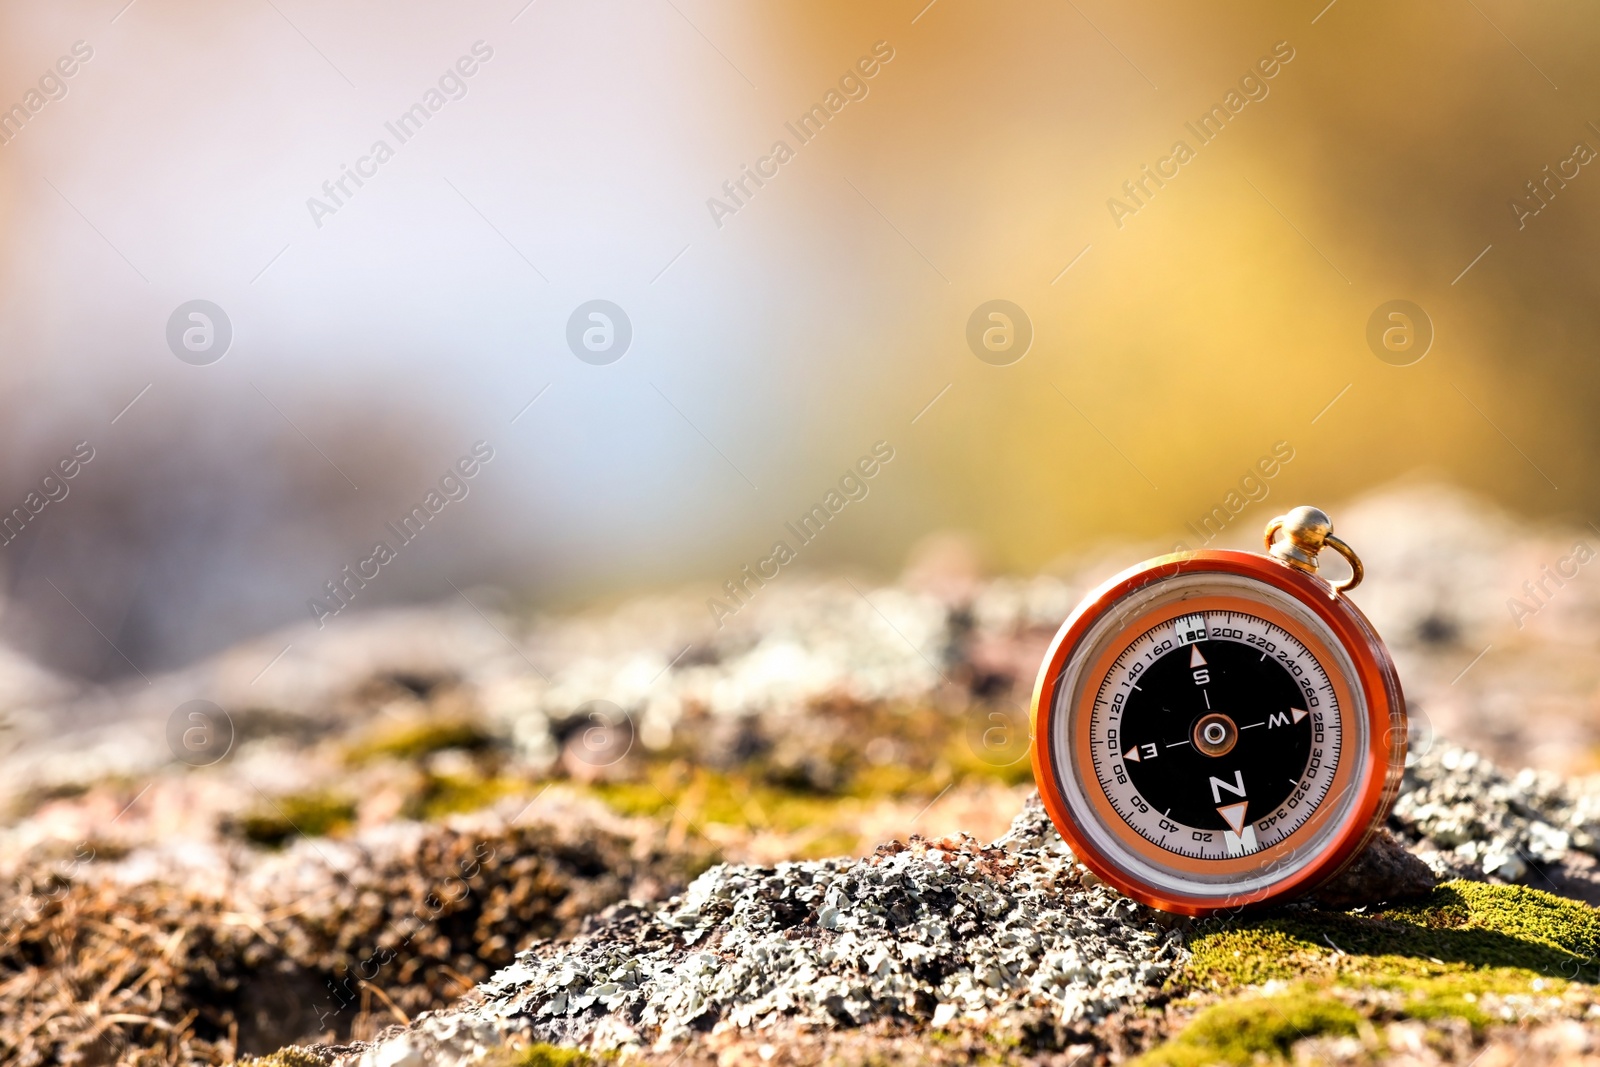 Photo of Compass on rock against blurred background, space for text. Camping equipment